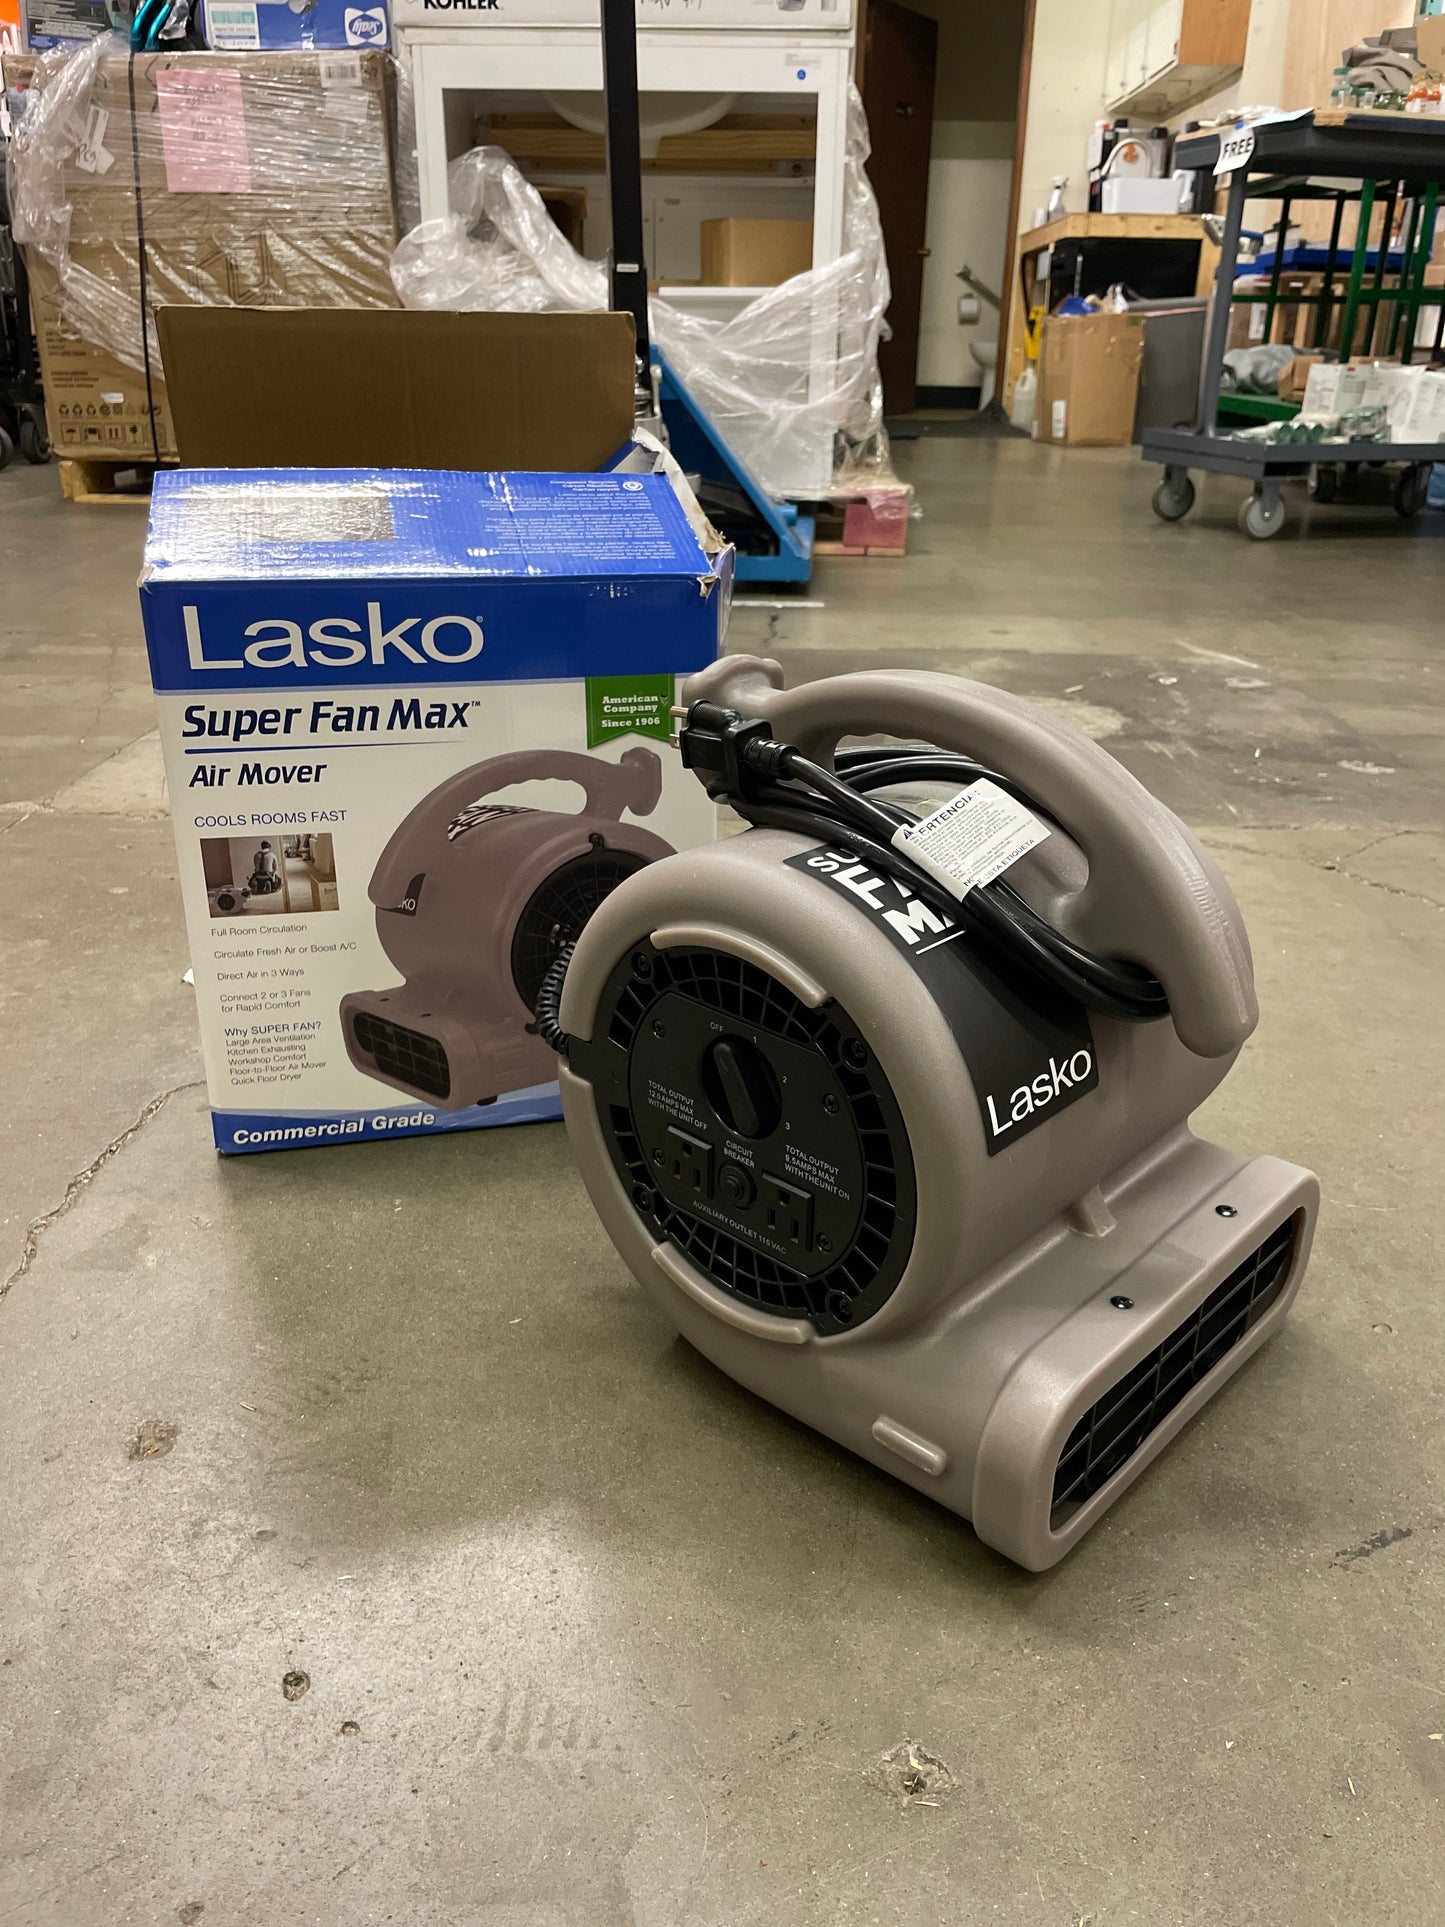 Costco - Lasko SF-20-G High Velocity Super Fan Max Air Mover Floor Fan with 3 Speeds - Retail $69 Default Title